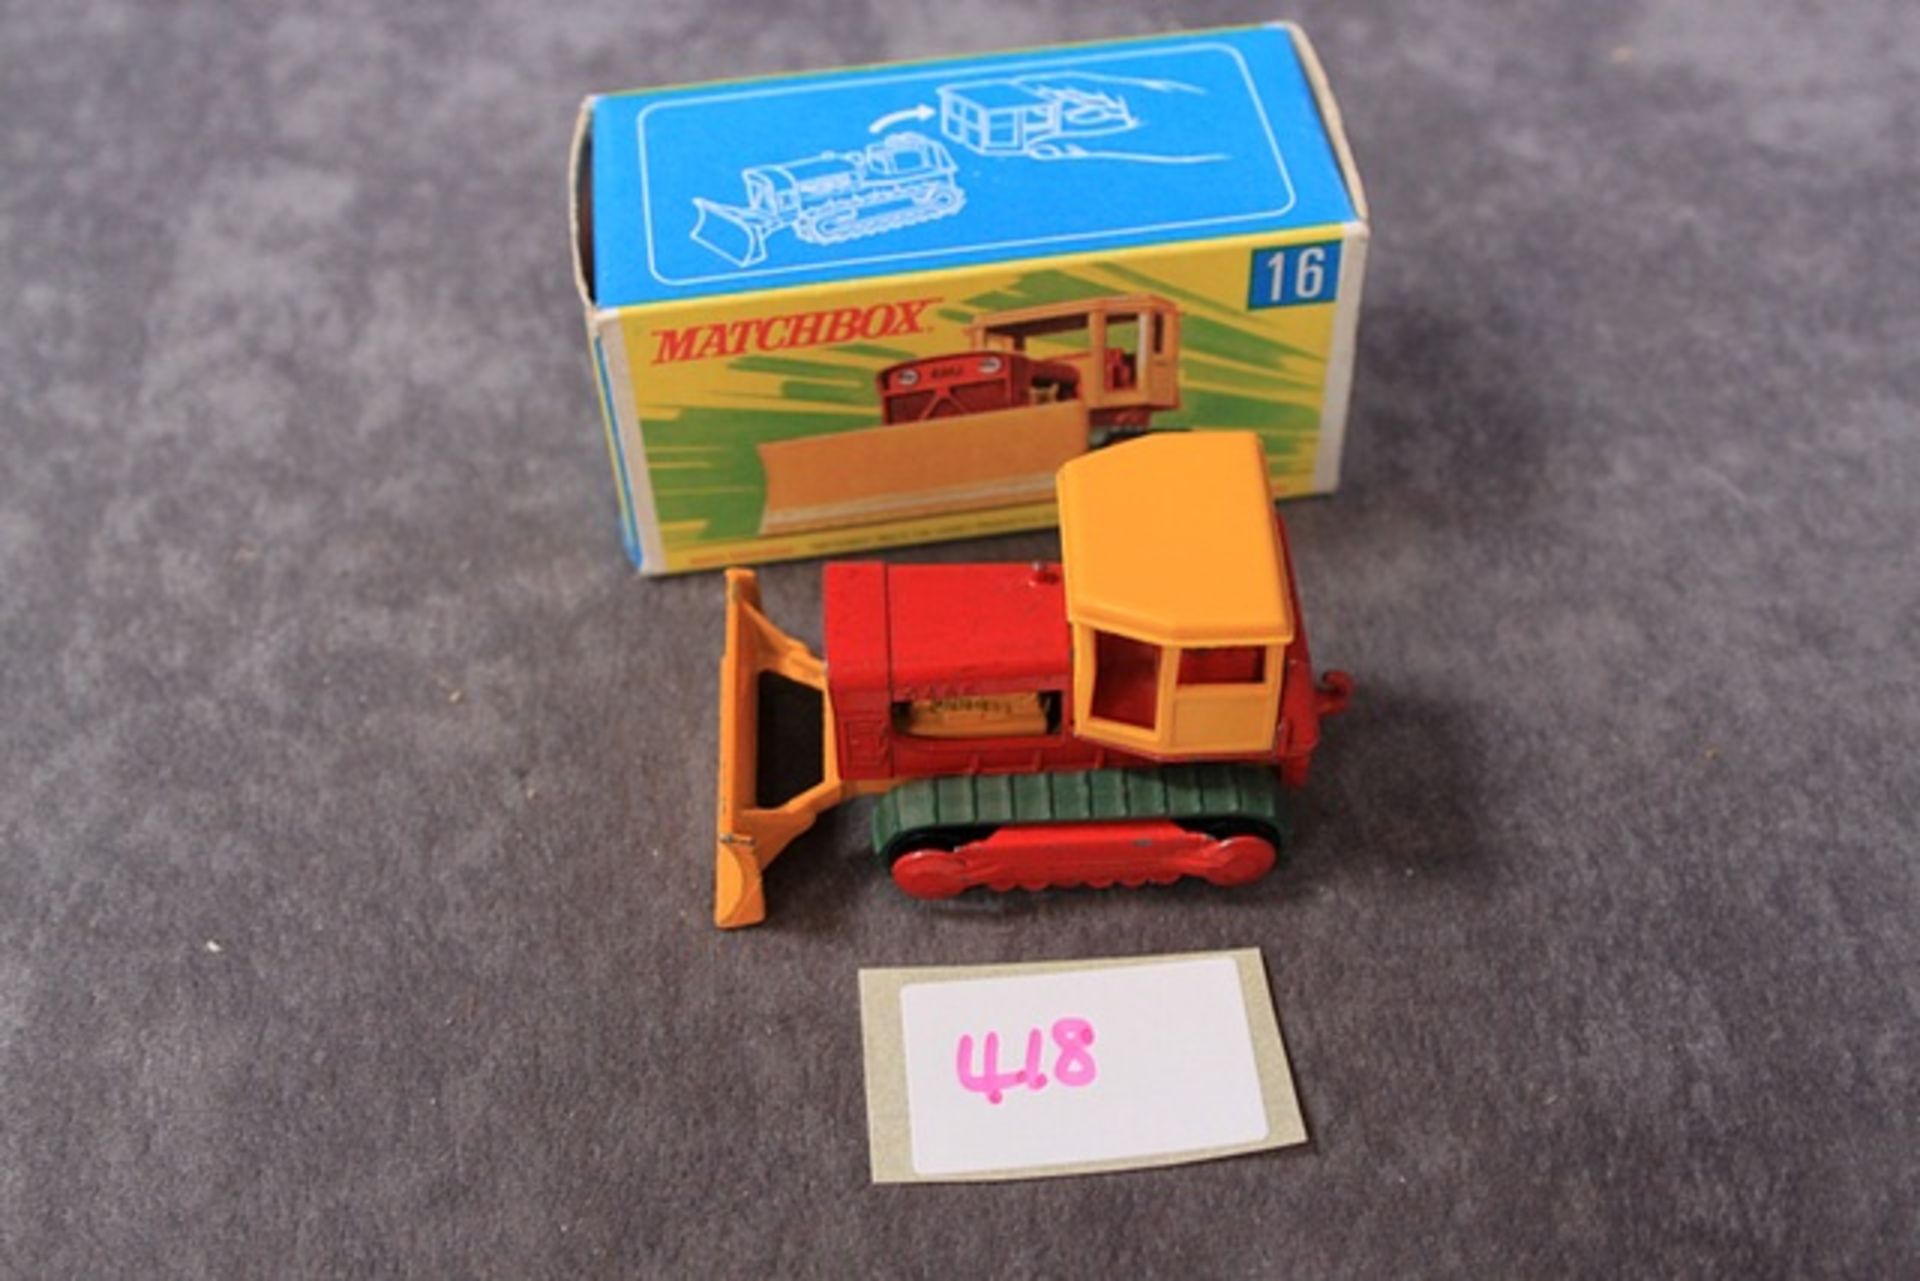 Mint Matchbox Series A Lesney Product Diecast # 16 Case Tractor With Nr Mint Crisp Box - Image 3 of 3